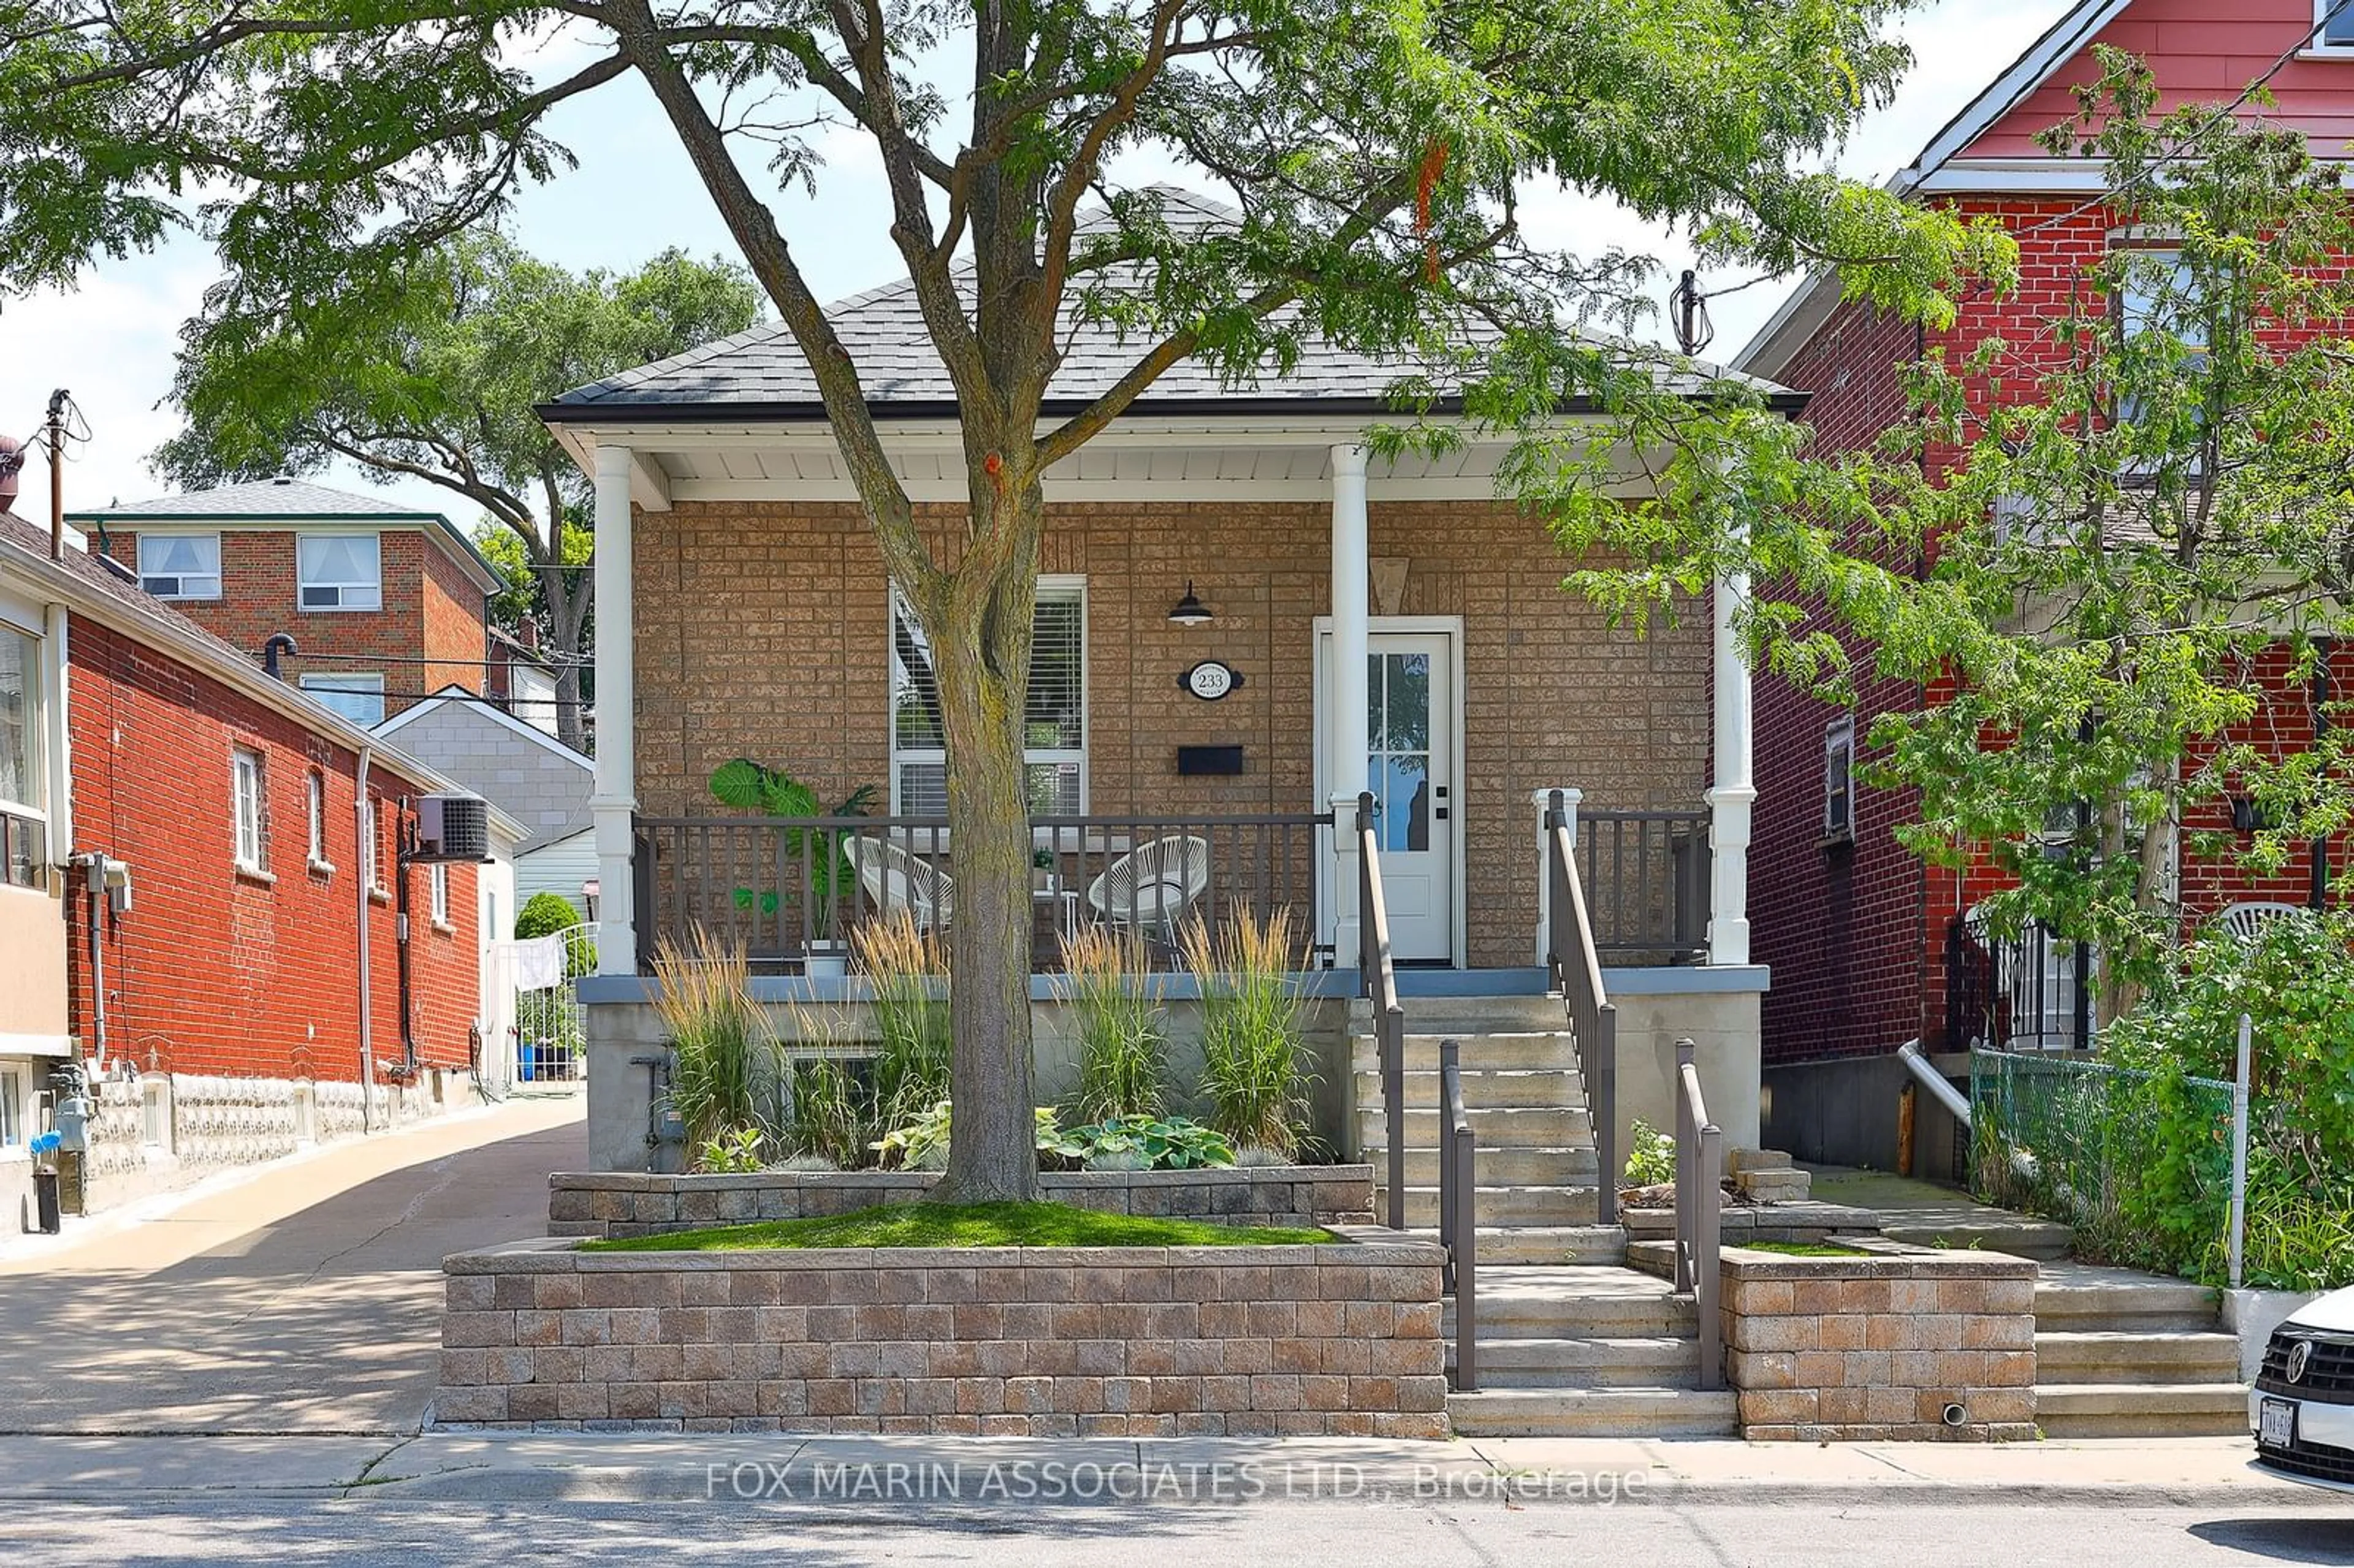 Home with brick exterior material for 233 Rosethorn Ave, Toronto Ontario M6M 3K9